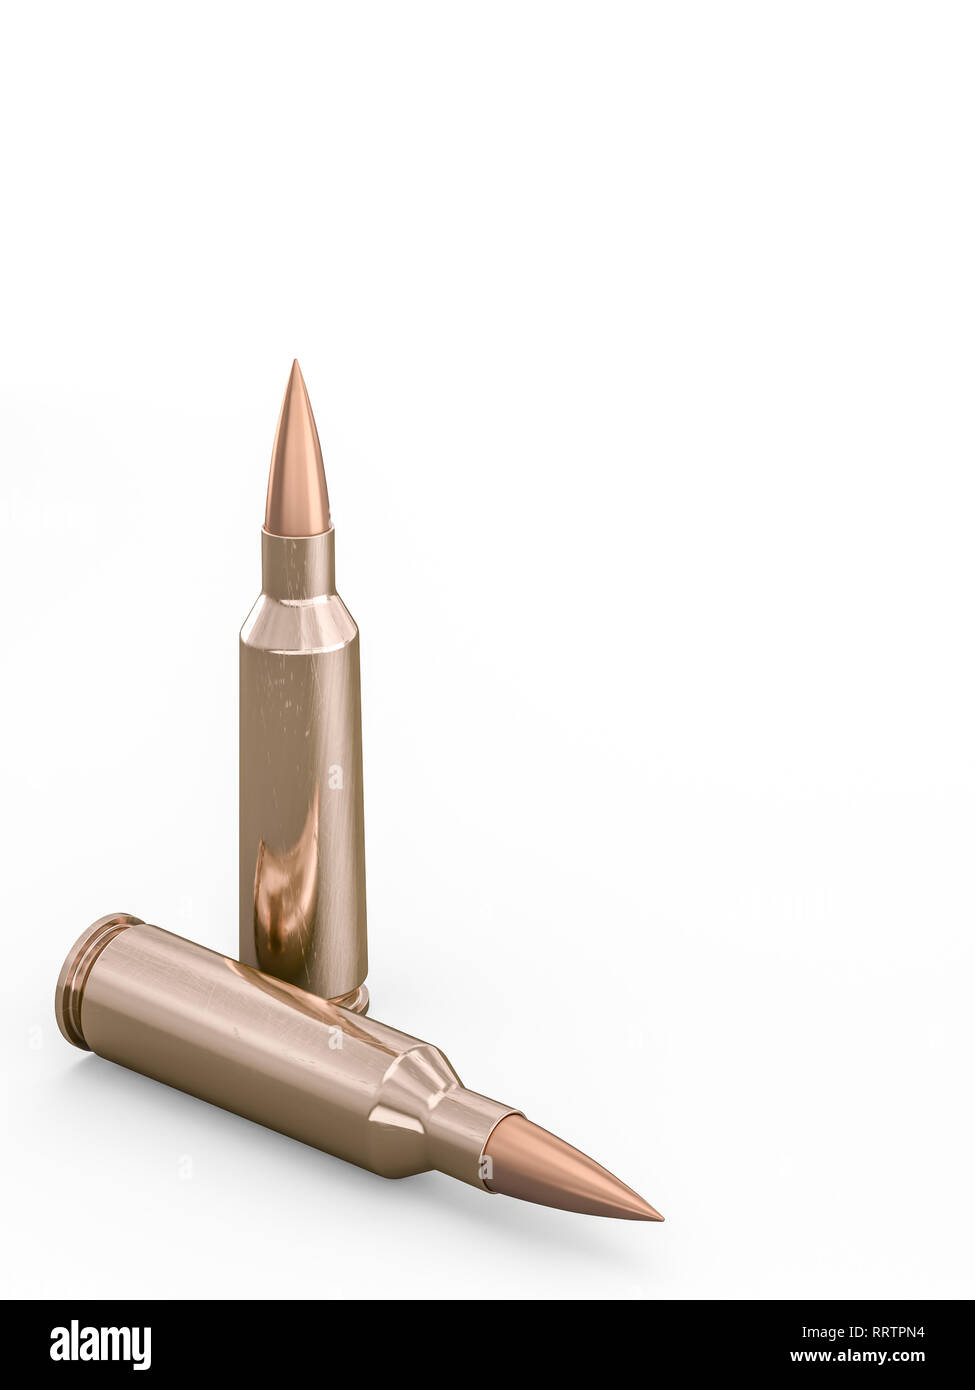 3d rendering image of rifle bullet Stock Photo